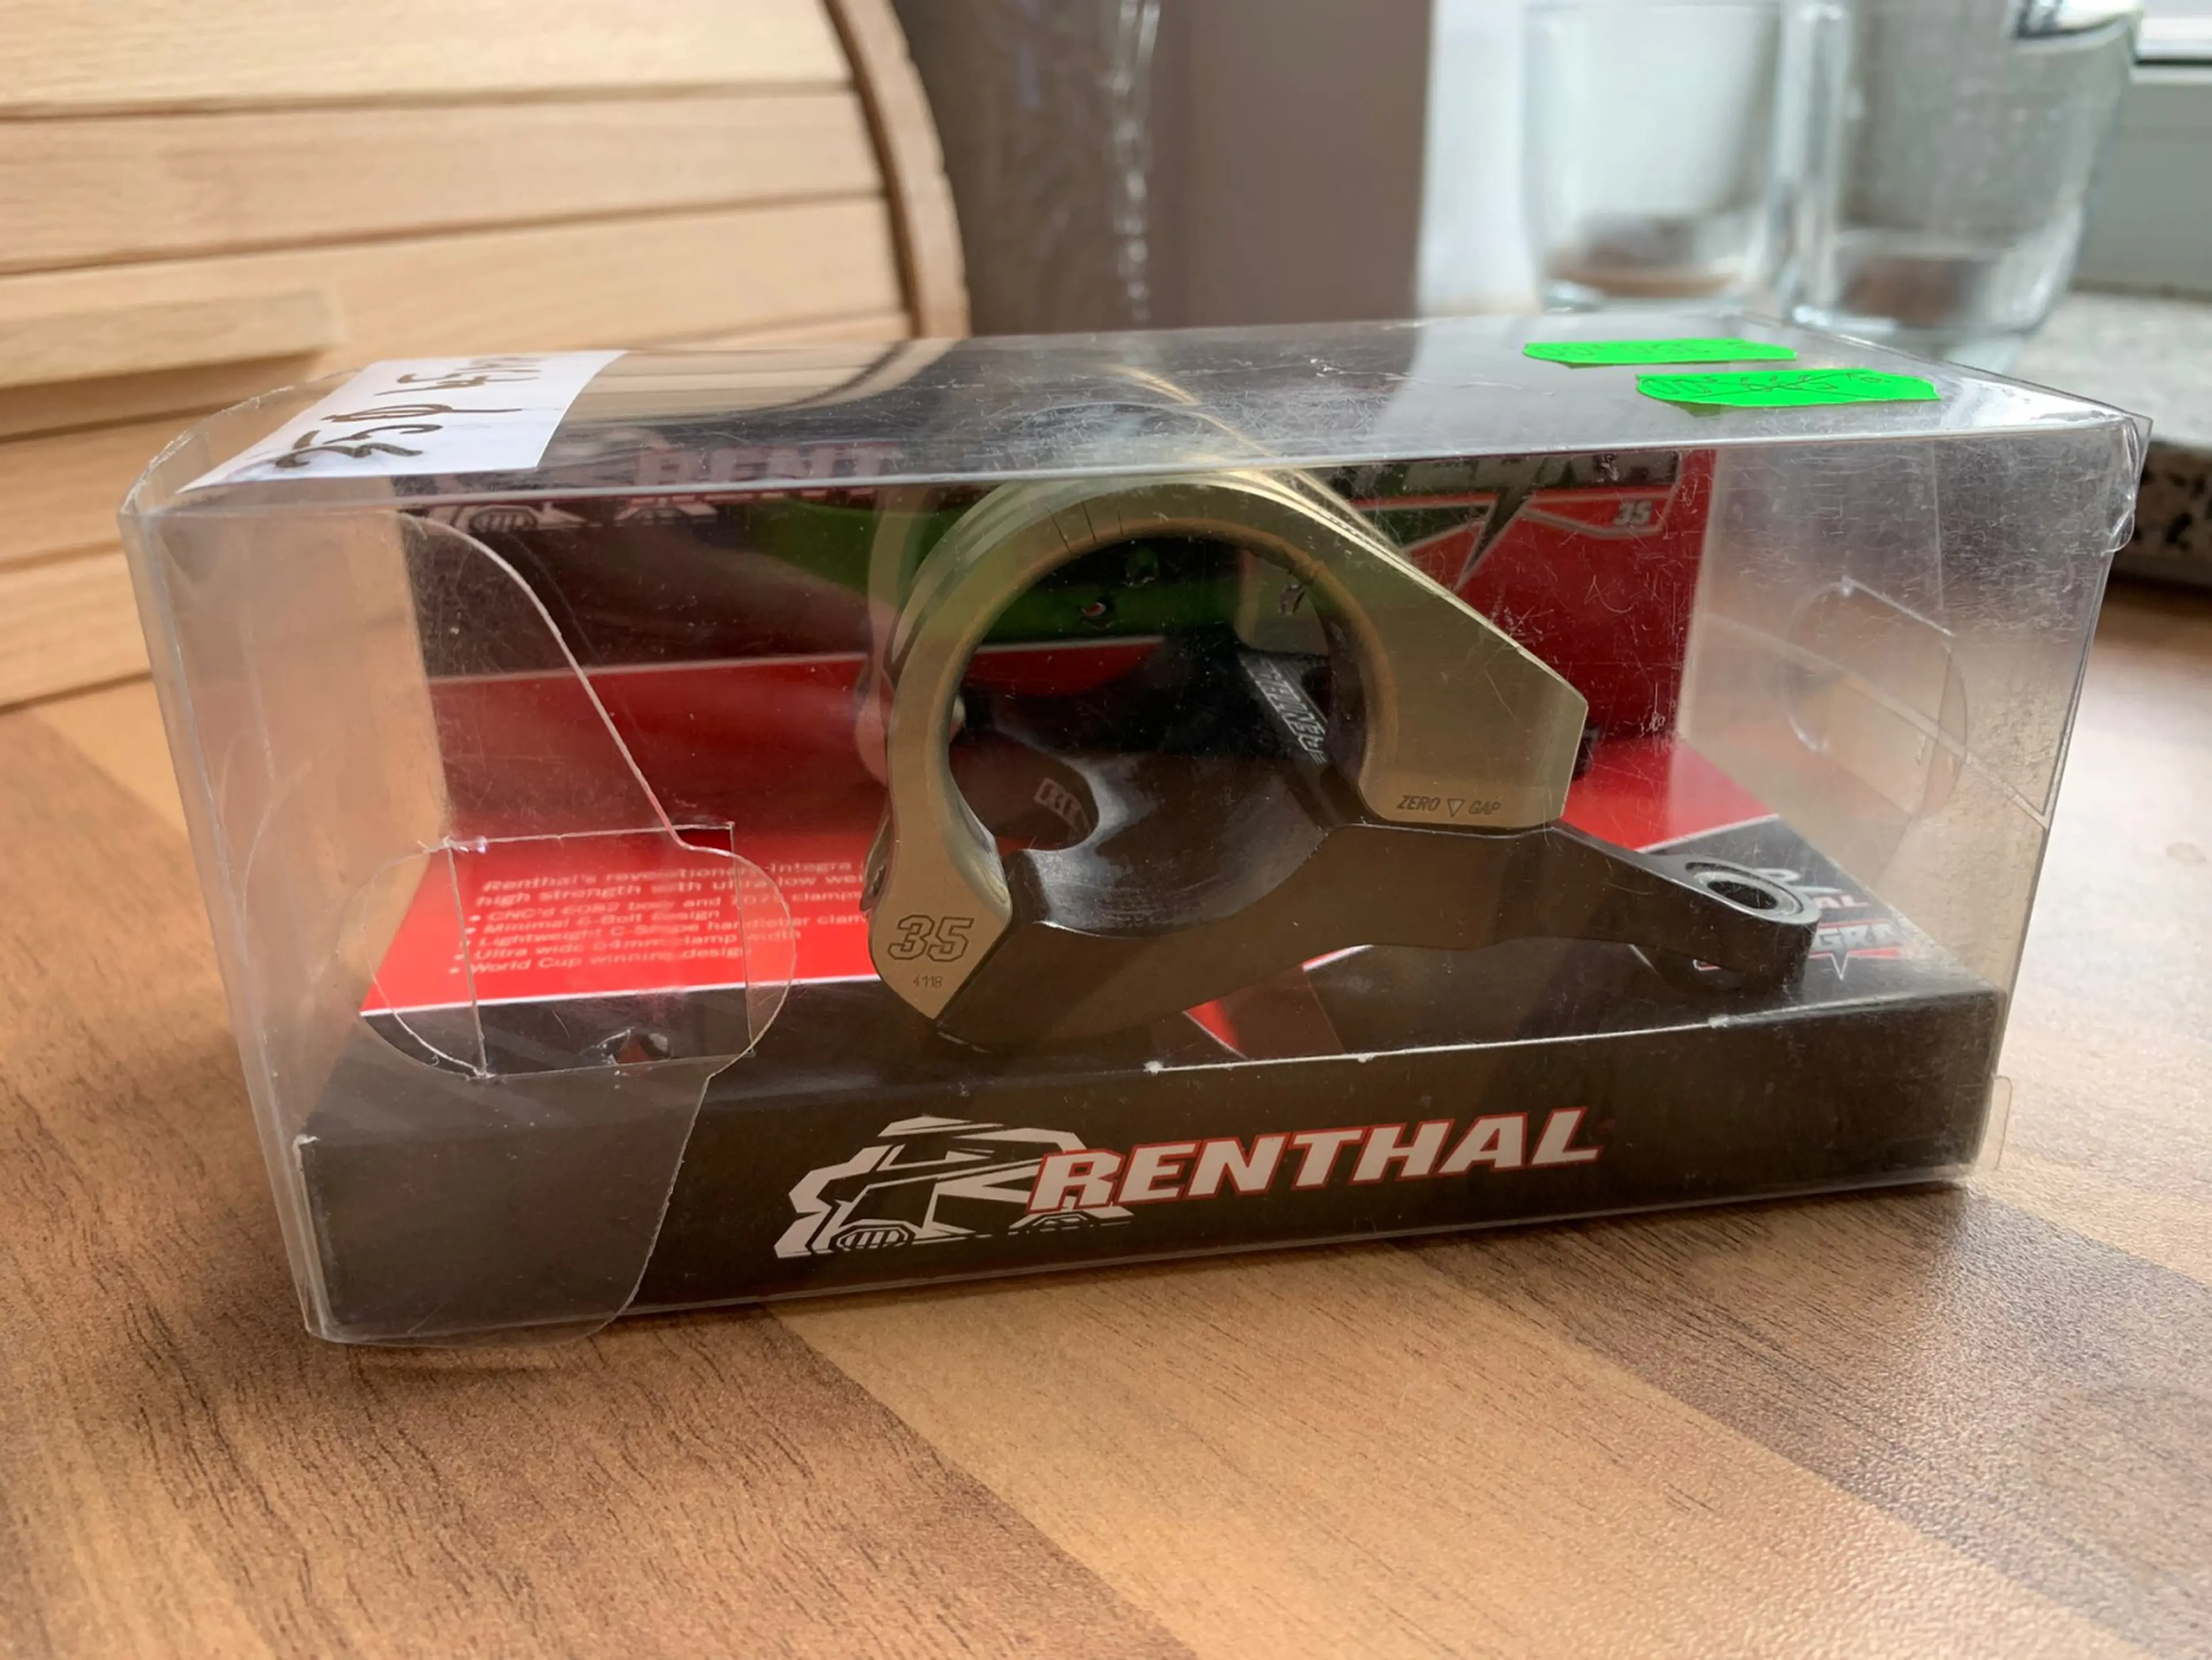 1. Renthal integra 2 35 lungime 50mm rise 0